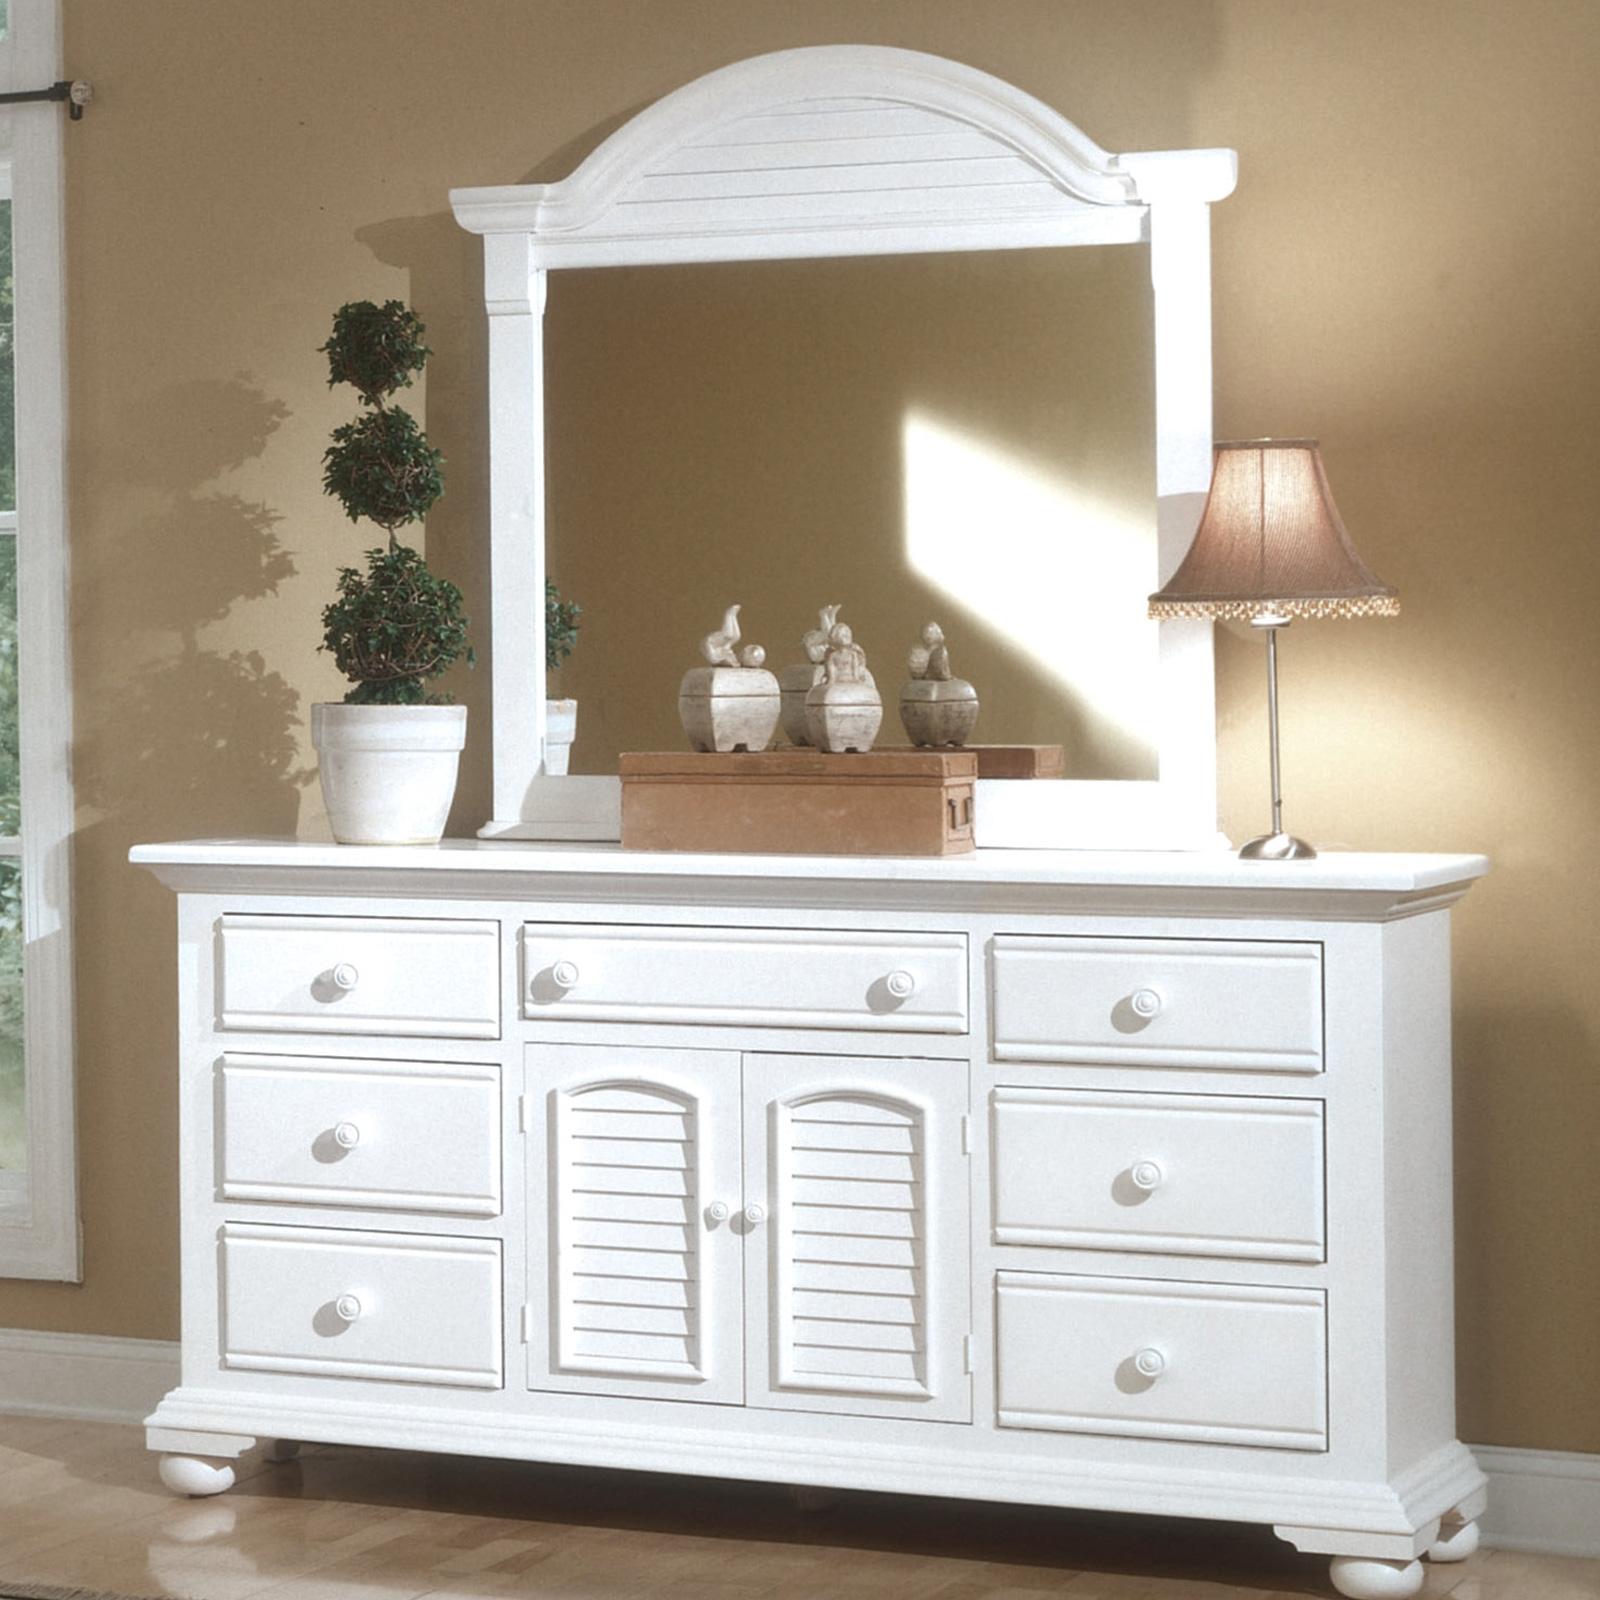 

    
American Woodcrafters COTTAGE 6510-272 Dresser White 6510-272
